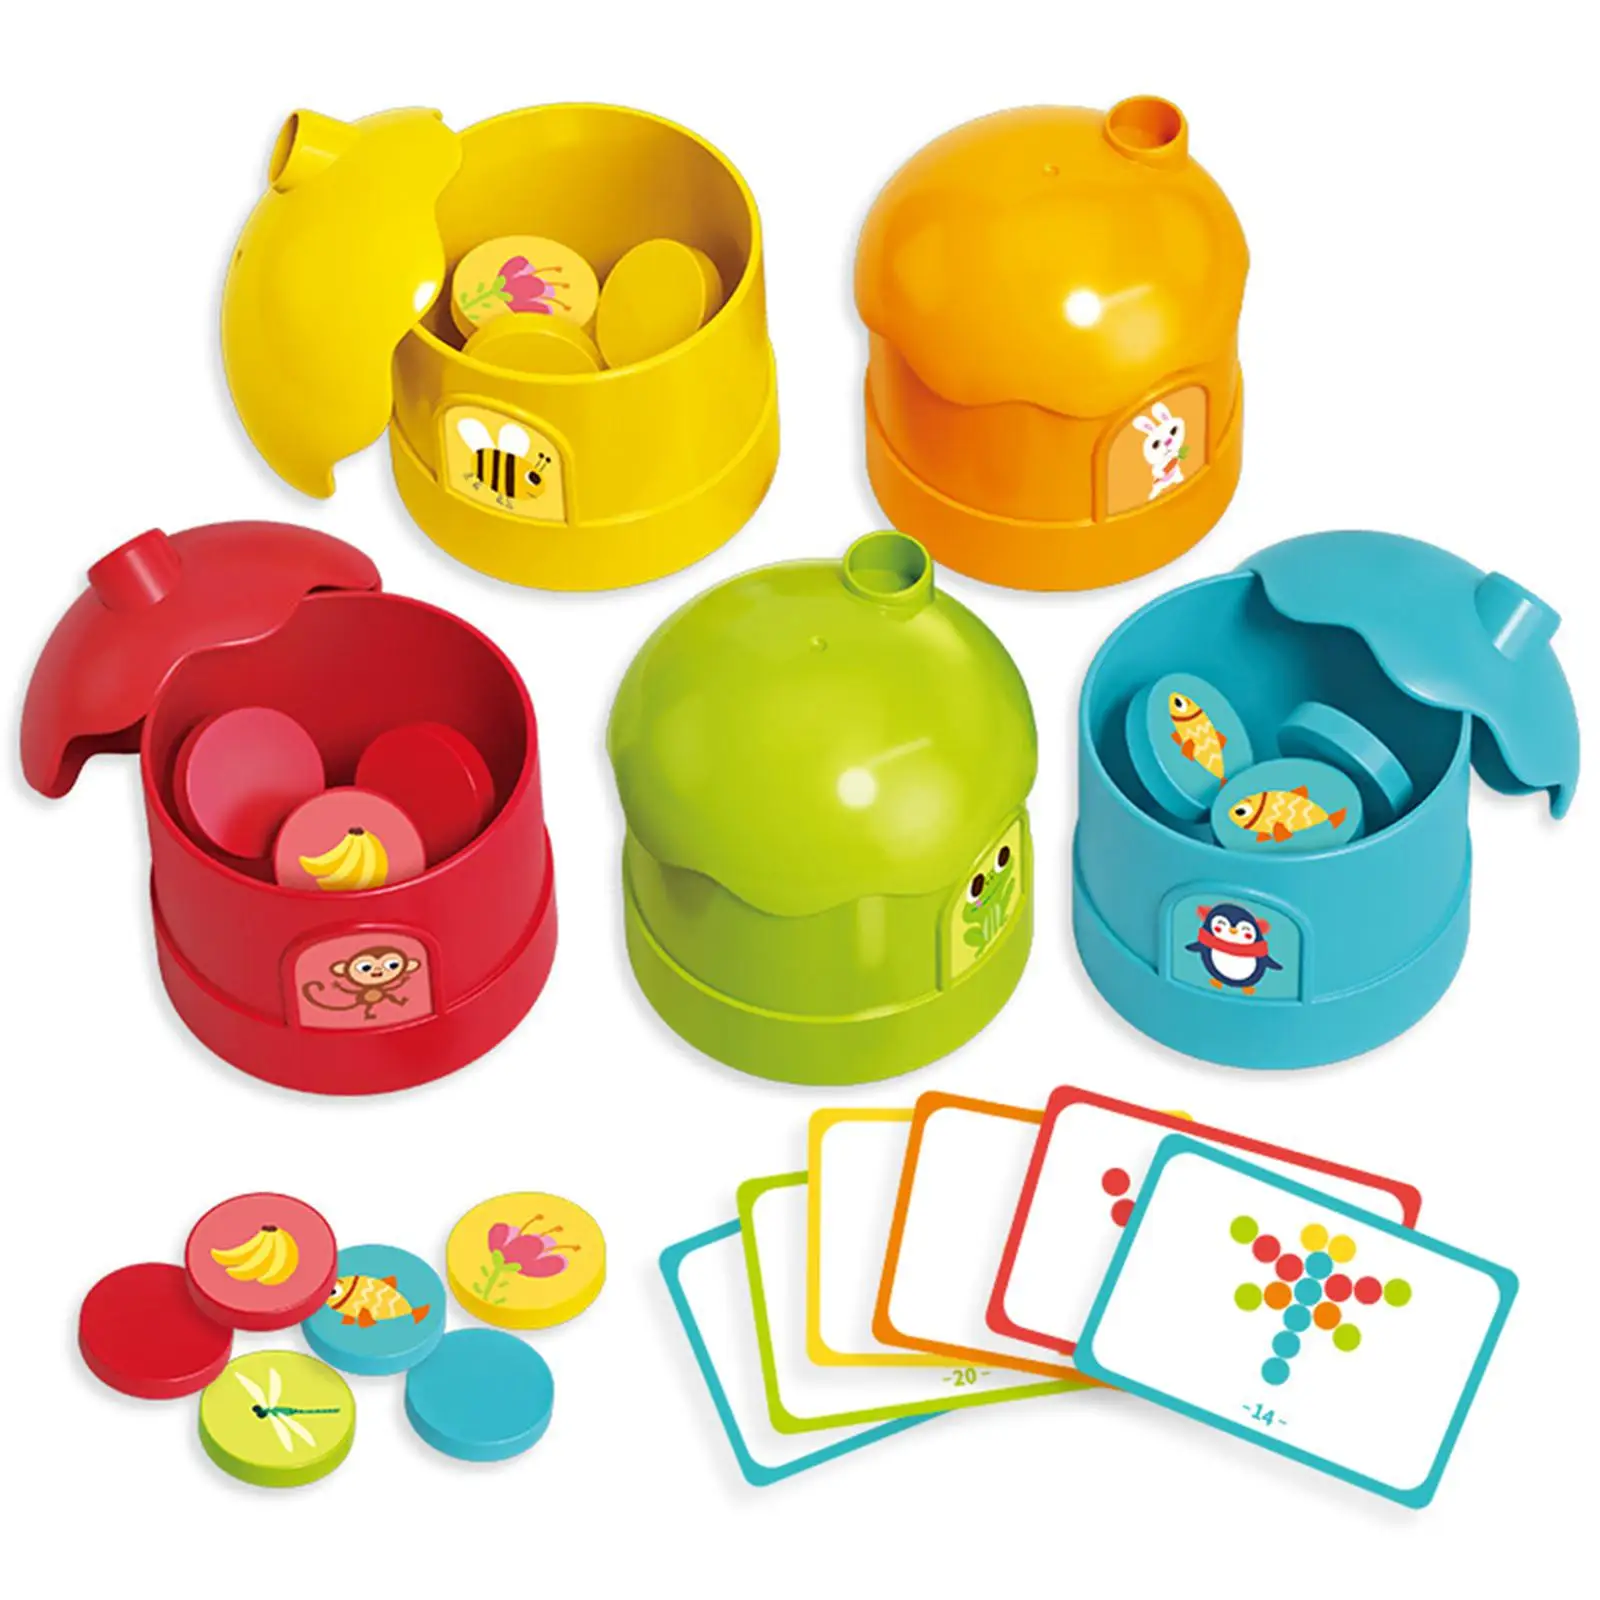 Early Education Color Sorting Cup Puzzle Classified Toys for Kindergarten